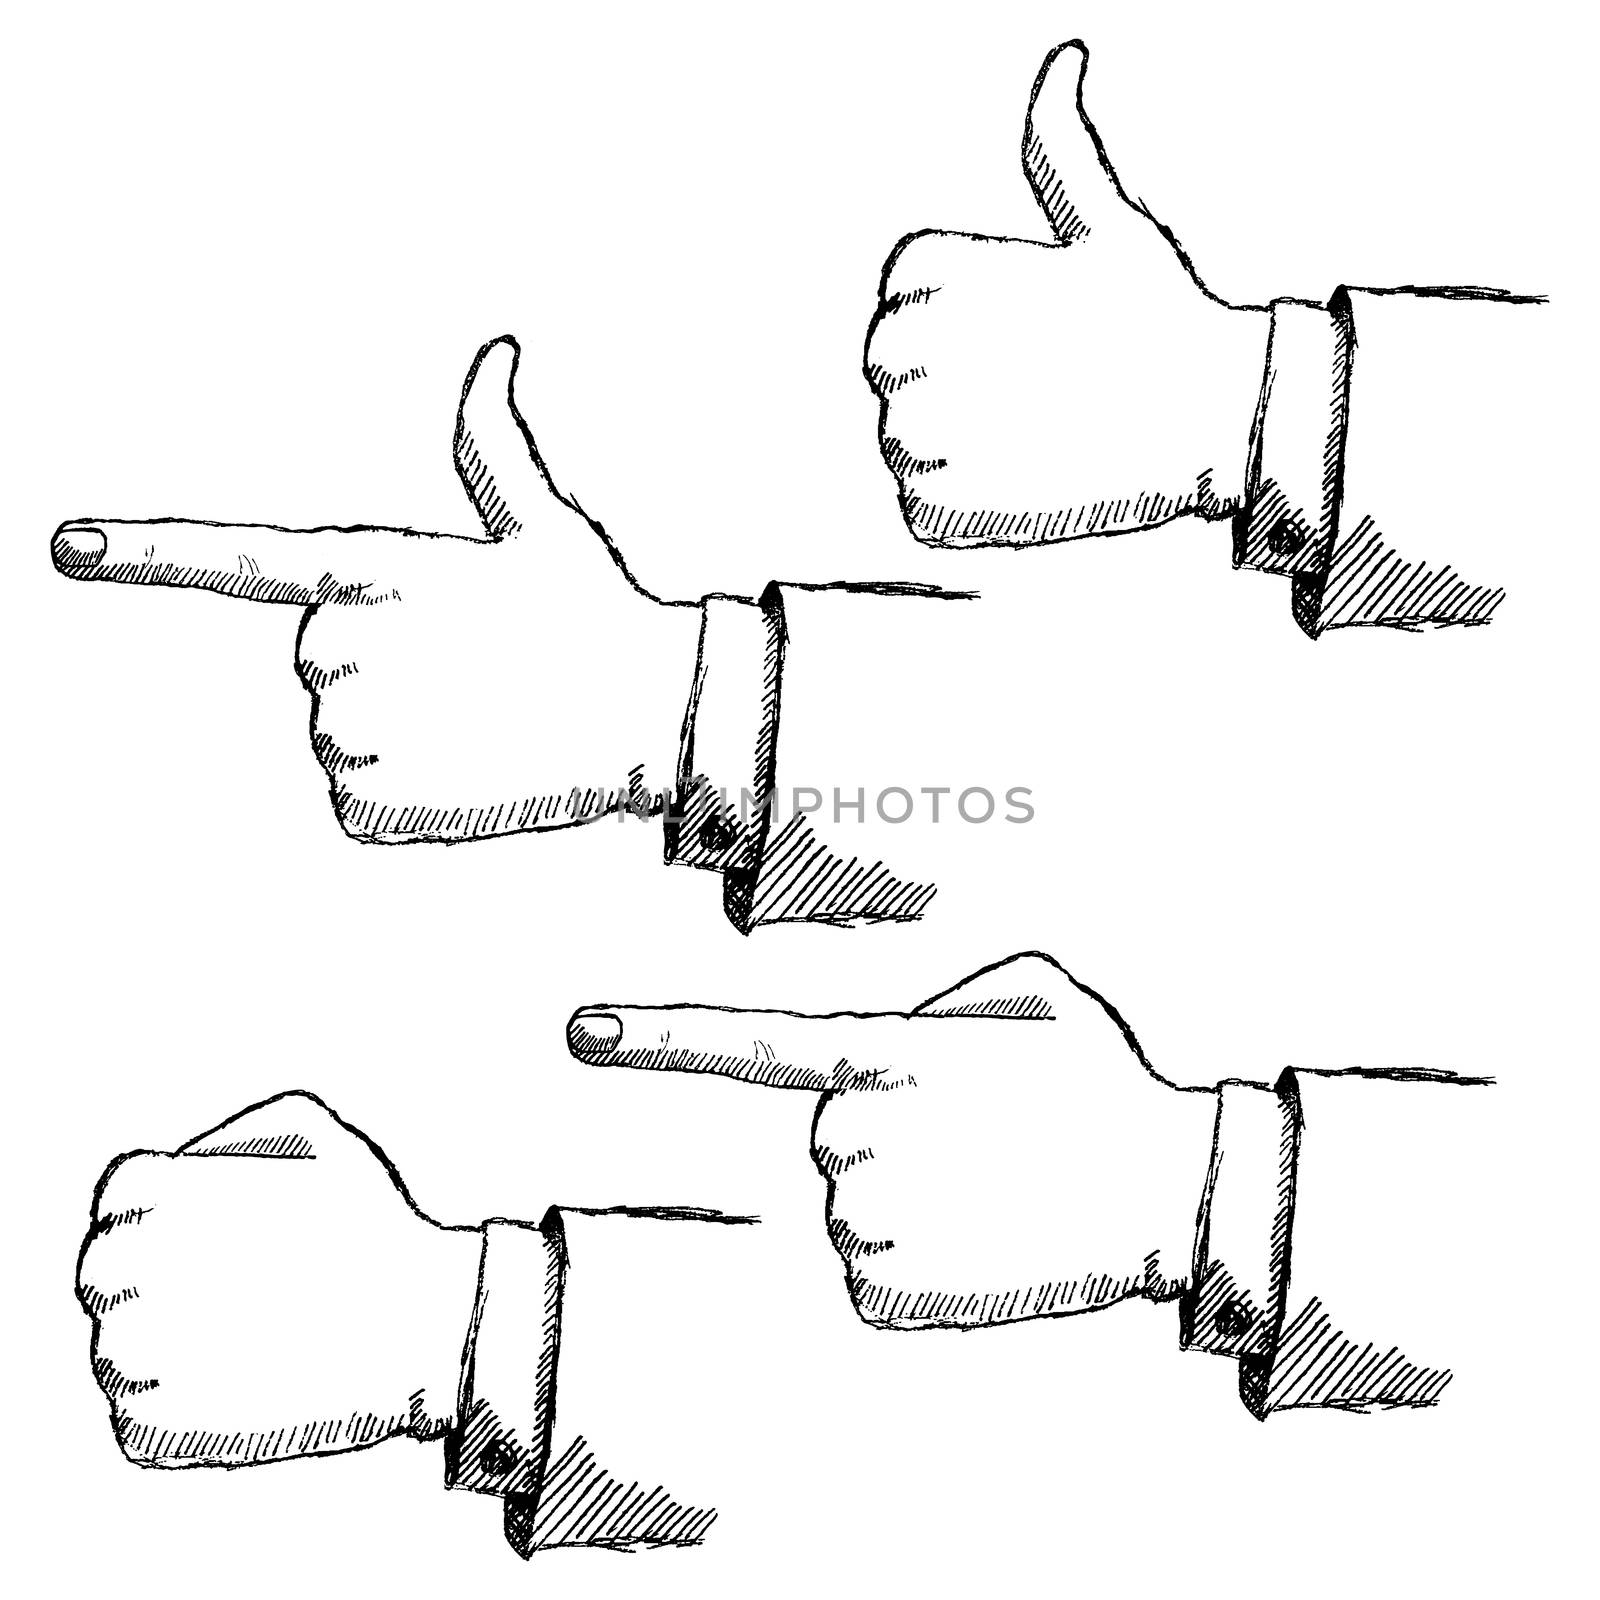 Handdrawn sketch hands set isolated on white background.